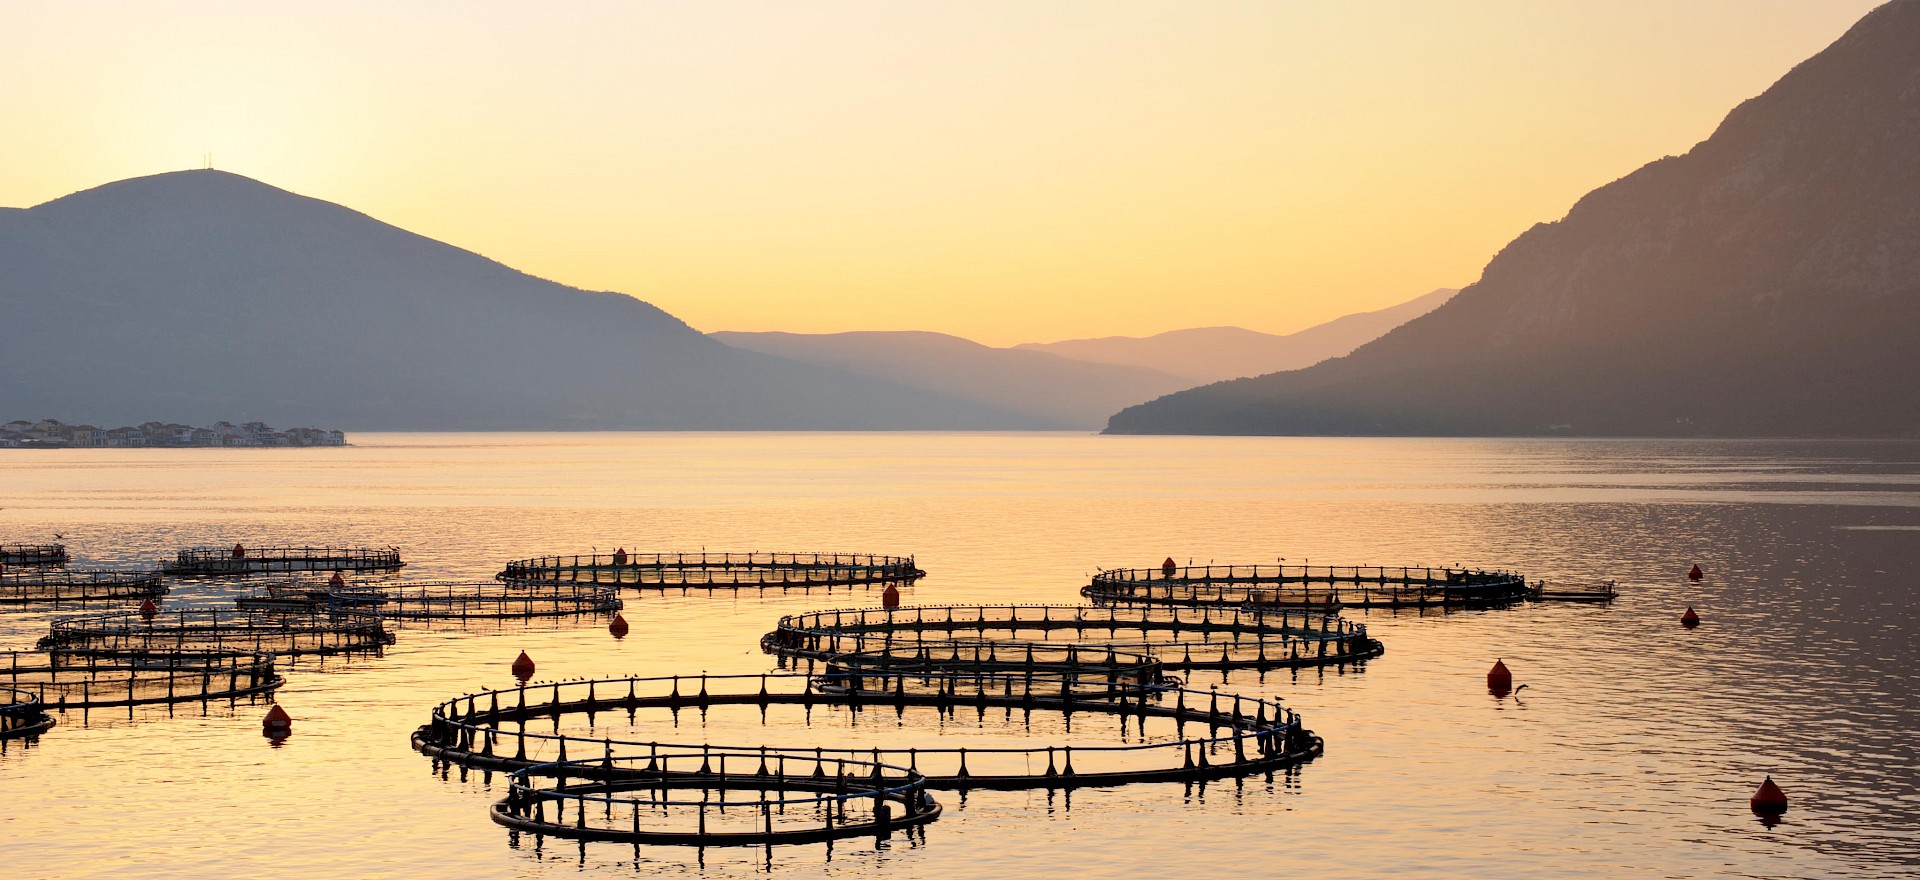 To go beyond is producing biosecure solutions for aquaculture.